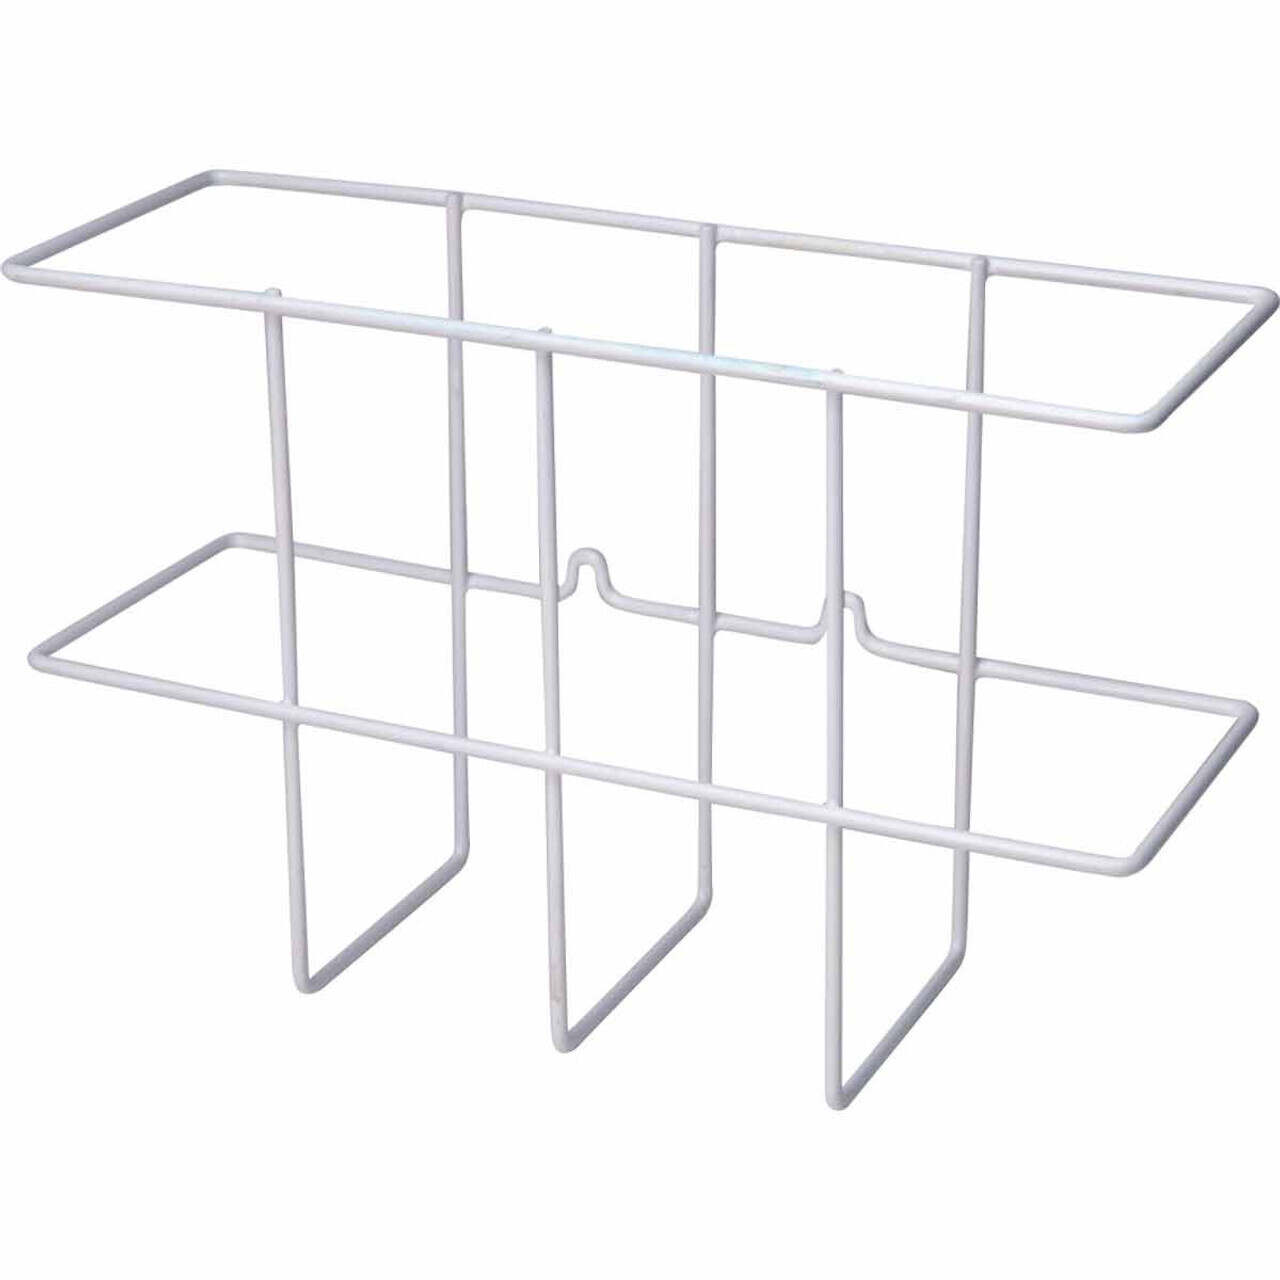 3 Ring White Zing Green Products 6069 Eco Binder Holder Wall Rack SDS Binder 